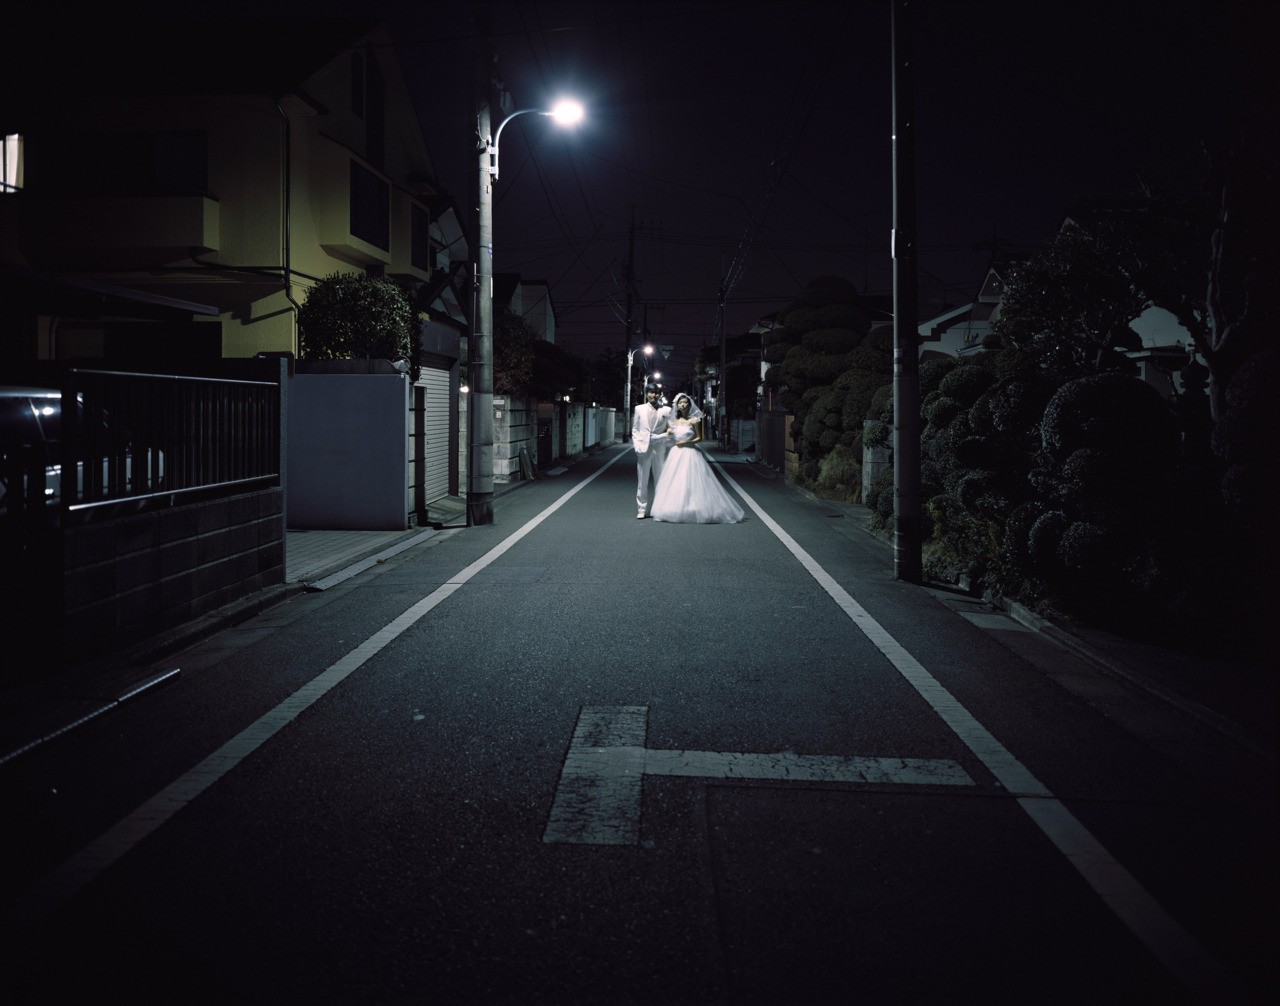 A couple wearing wedding dress and tuxedo is standing on the street at night.